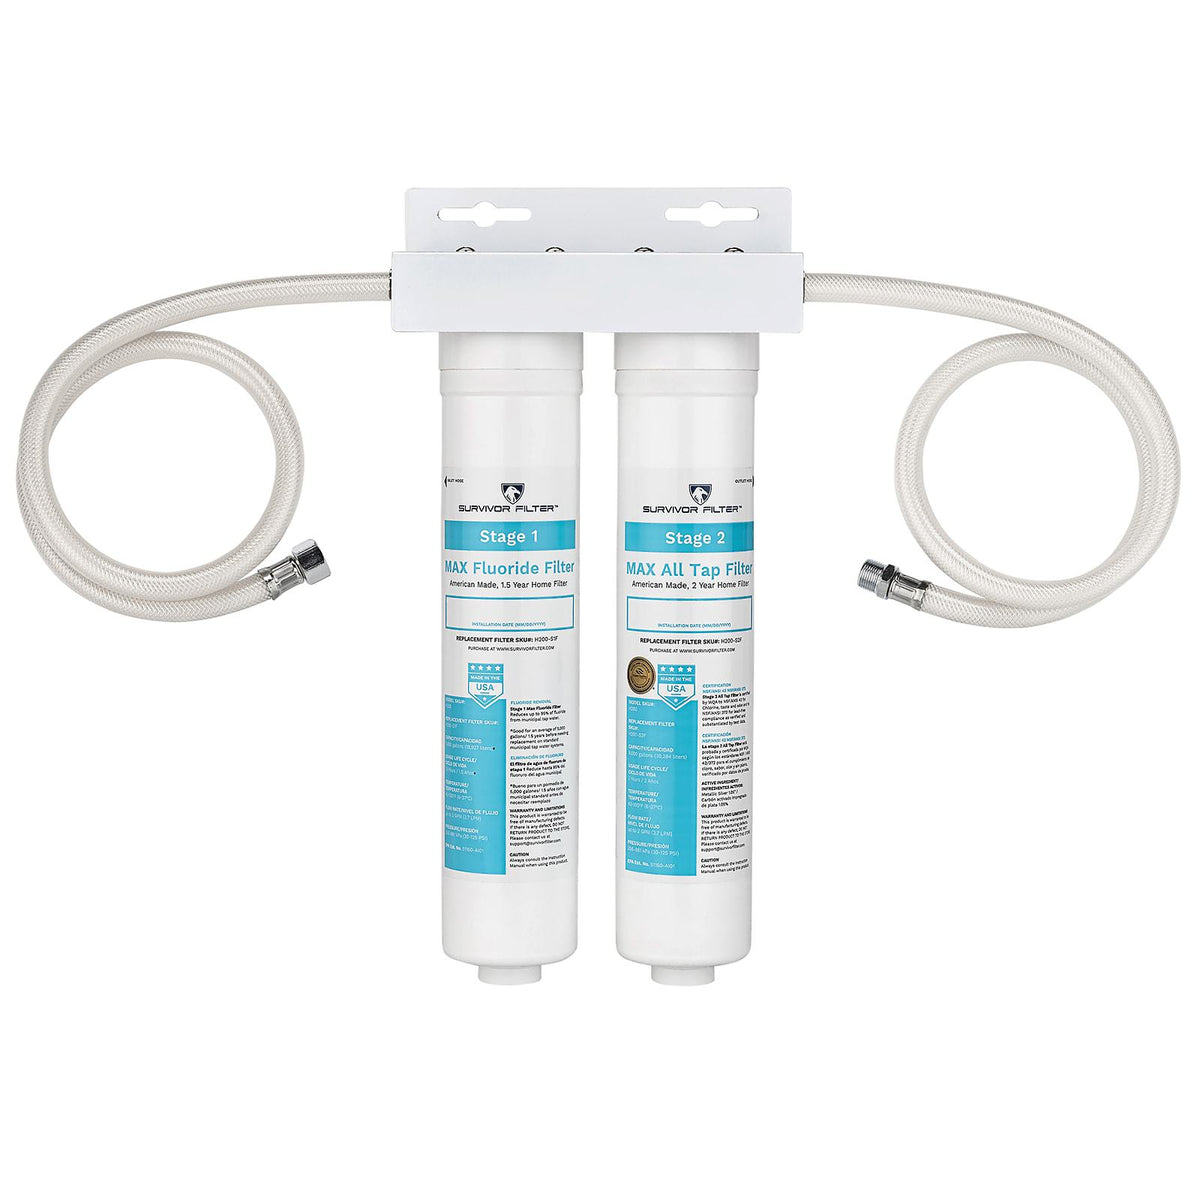 Survivor Filter Max, 2-Stage Fluoride and Chlorine In-Line Home Filter